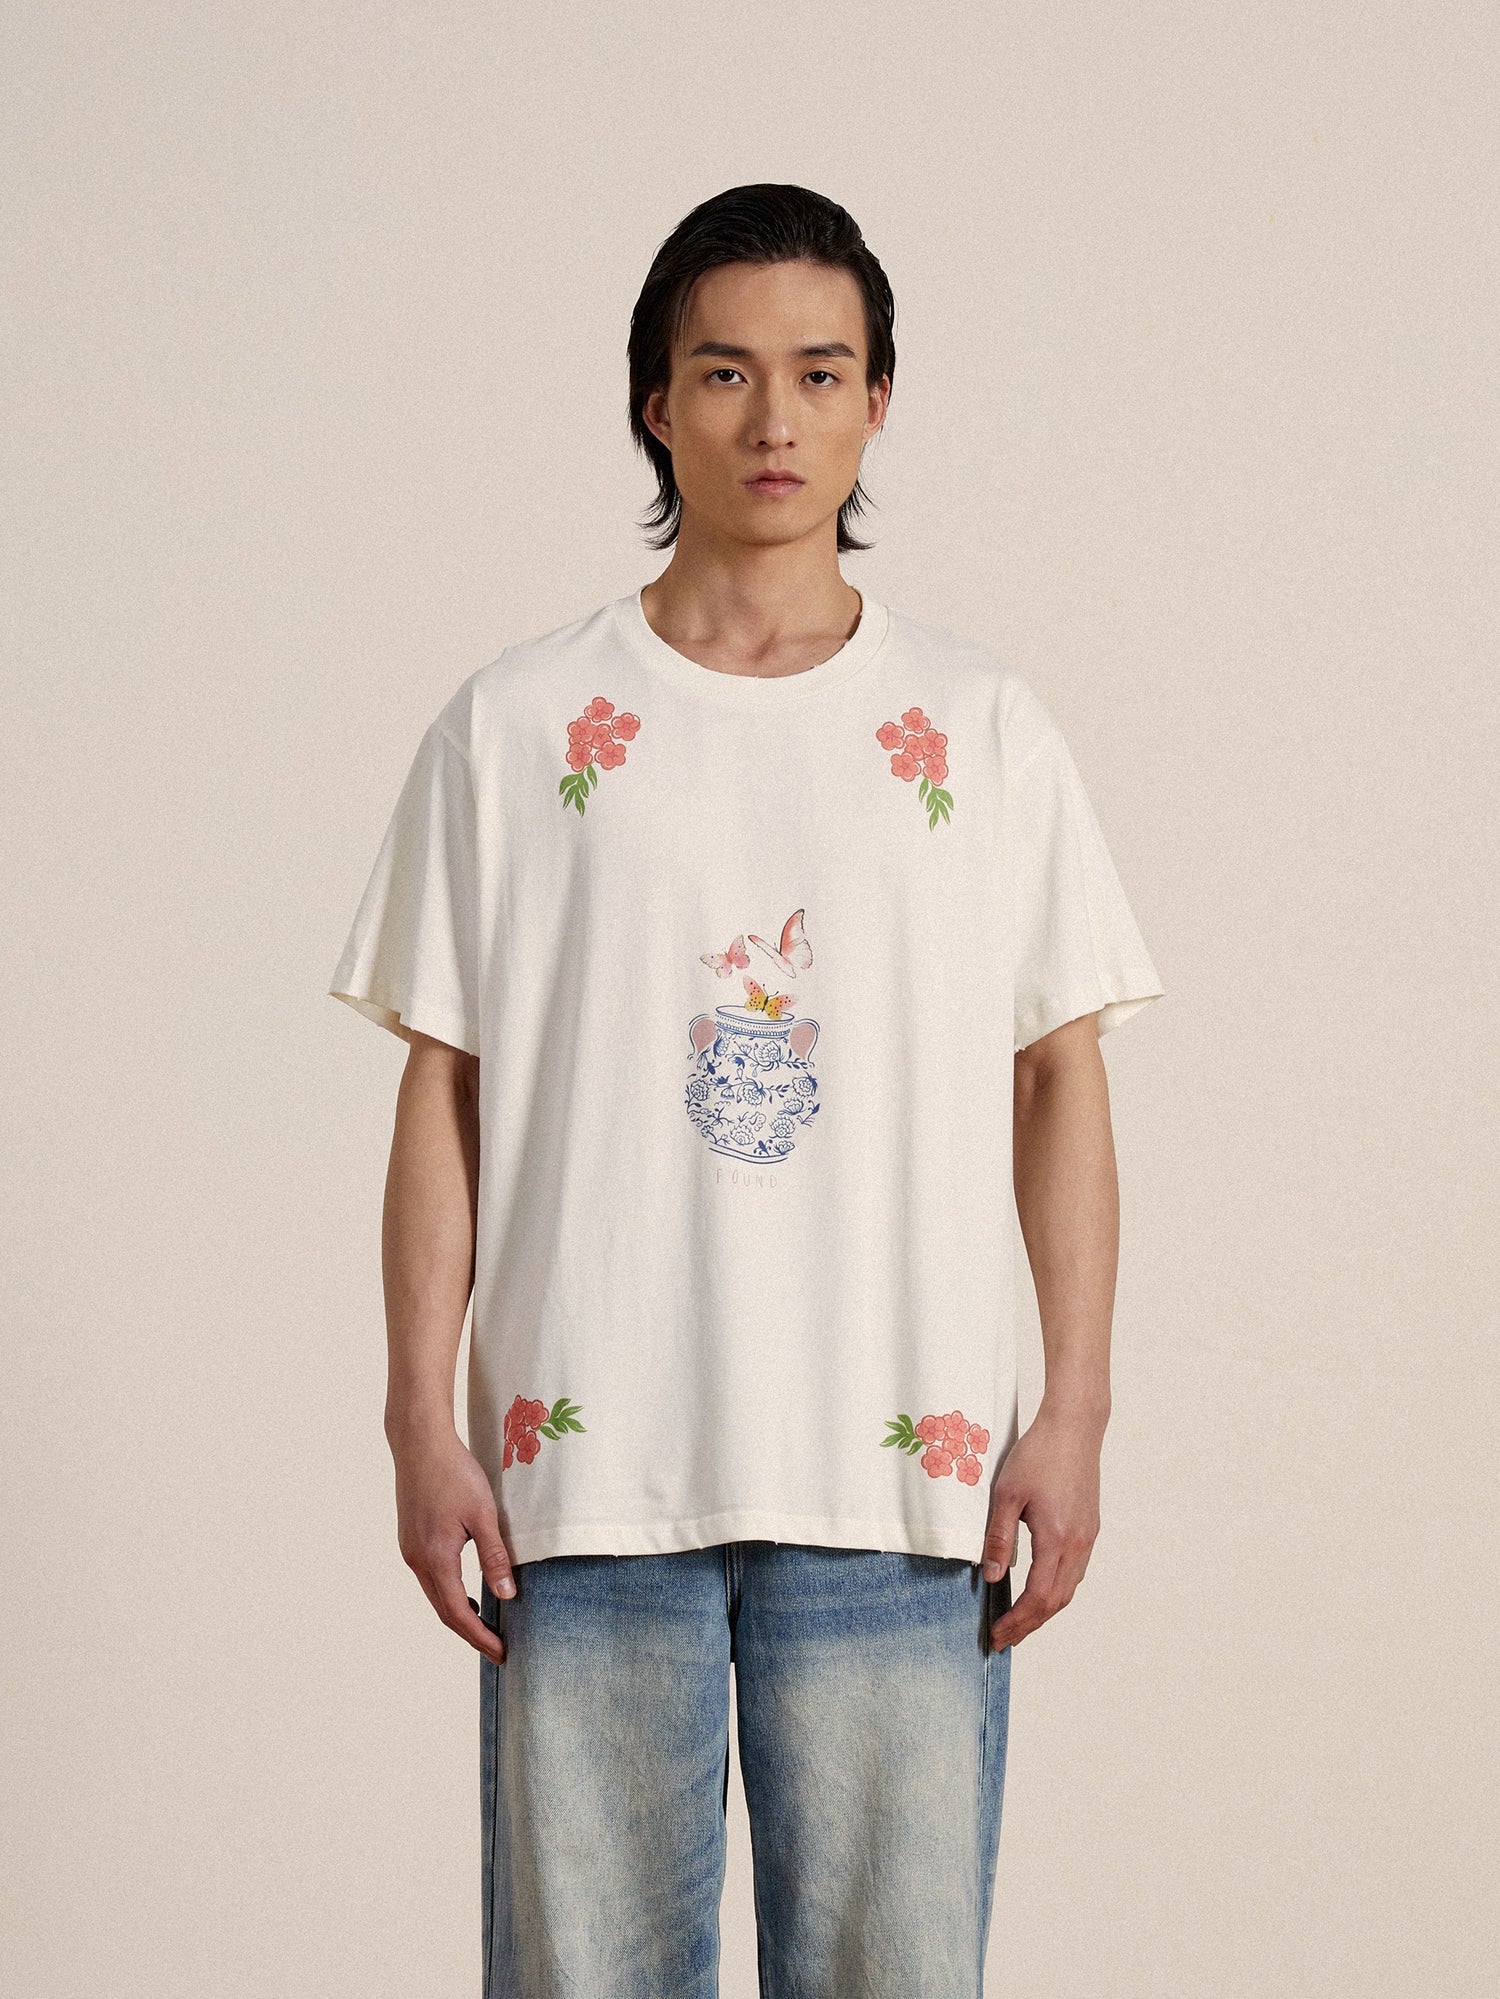 A man wearing a Found Flower Pot Tee with flowers on it, exuding springtime charm.